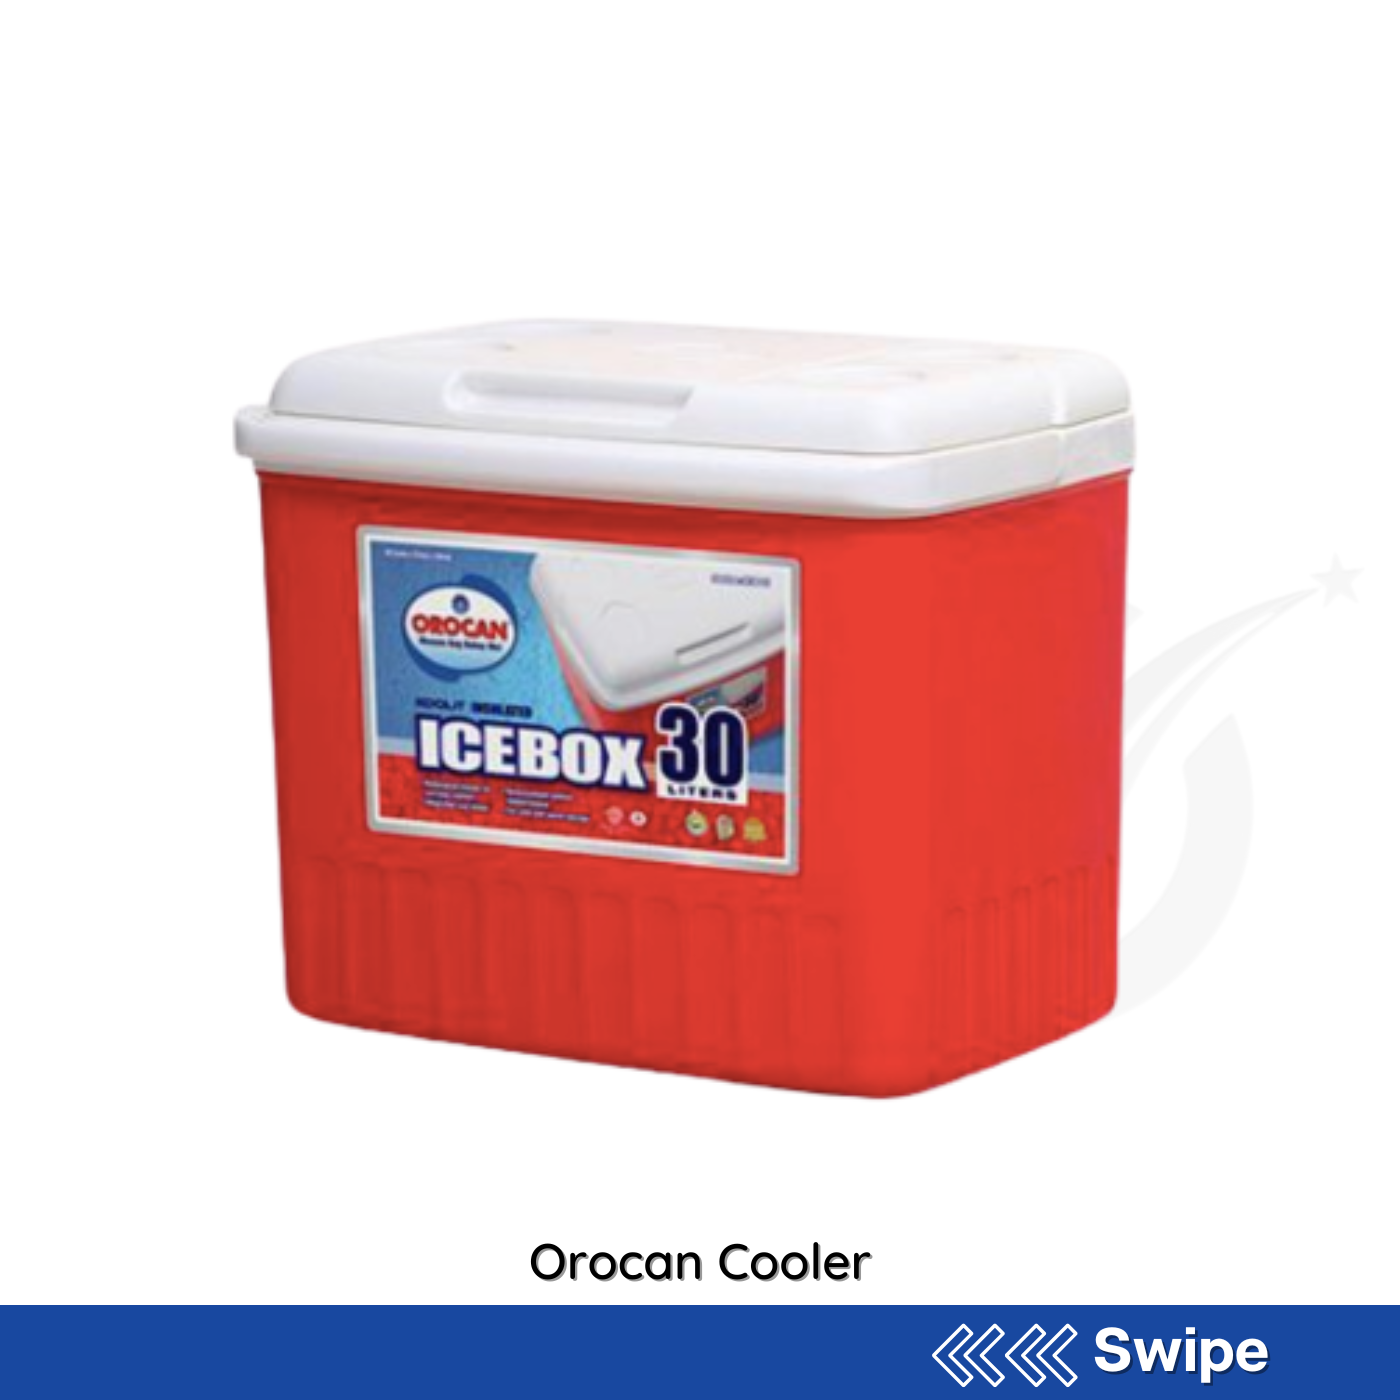 Orocan Cooler - People's Choice Marketing